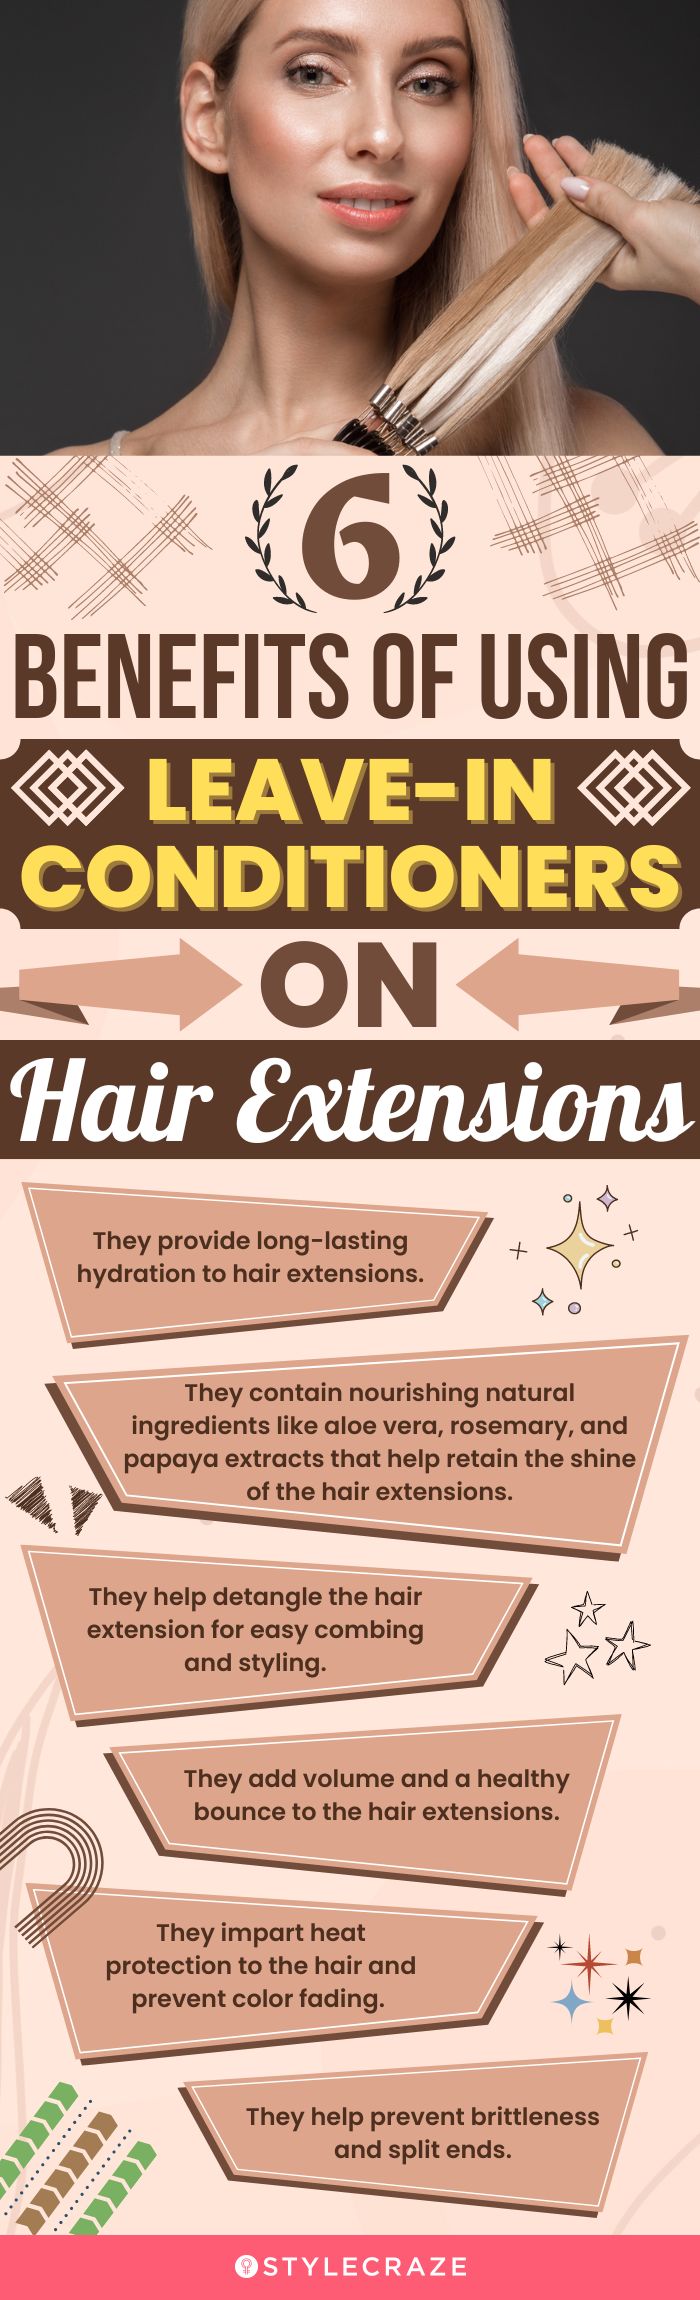 5 Benefits Of Using Leave-In Conditioners On Hair Extensions (infographic)